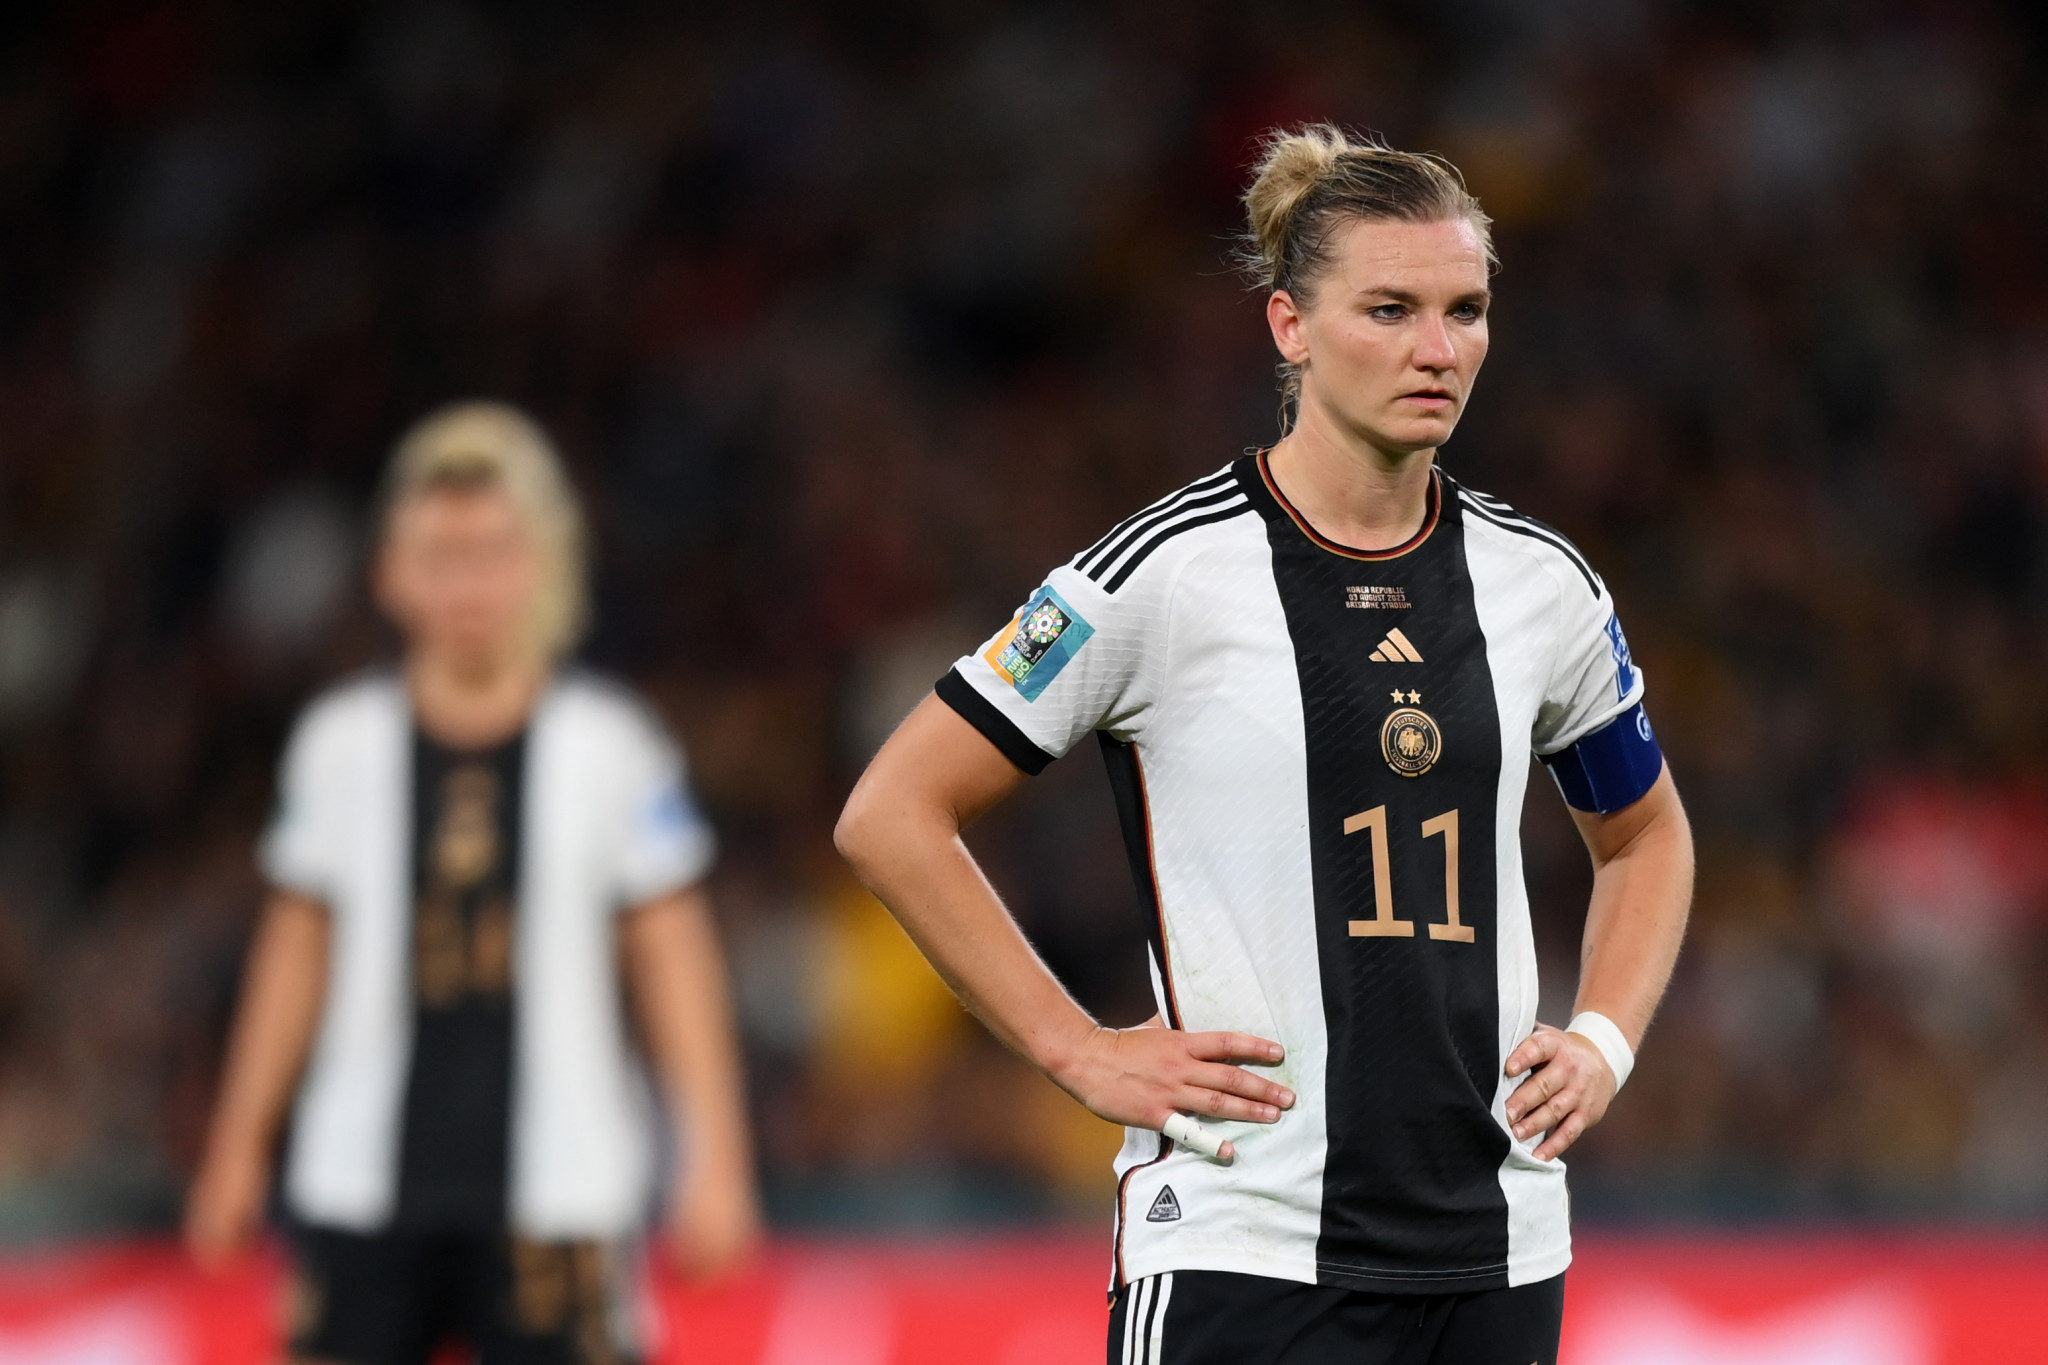 German captain Alexandra Popp scored but it was not enough to see her side advance to the last 16 ©Getty Images